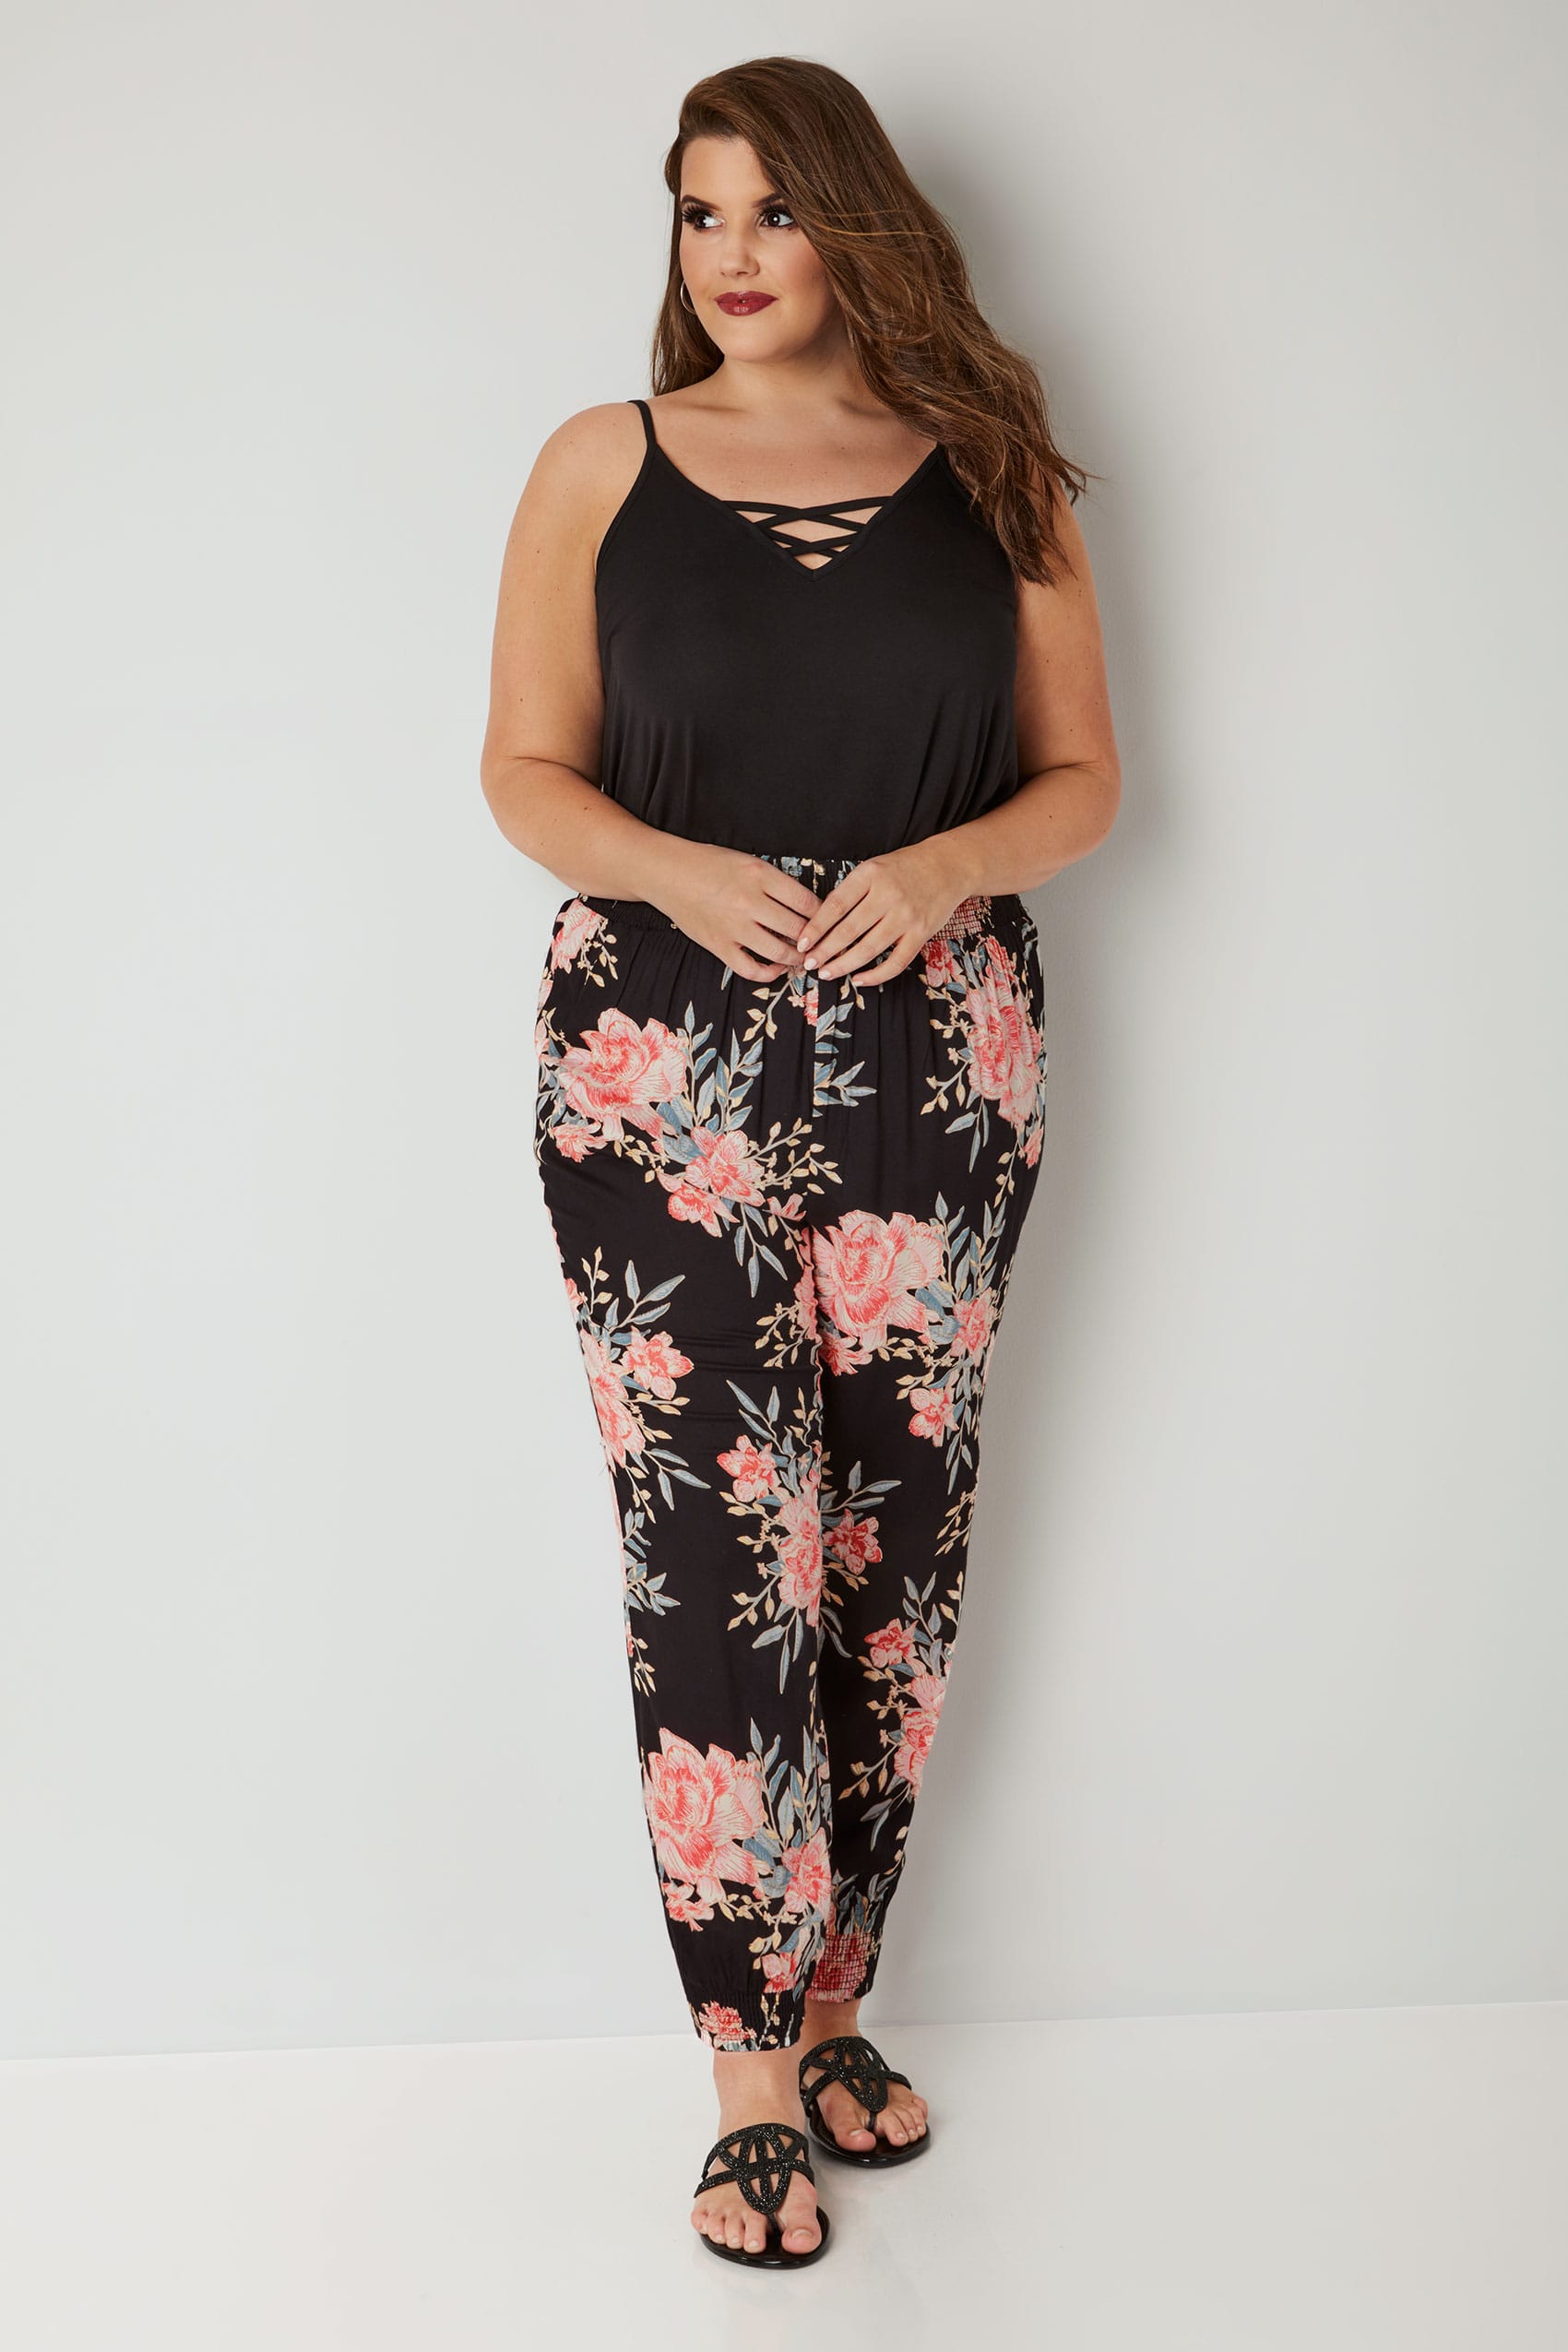 Black & Pink Floral Harem Trousers, plus size 16 to 36